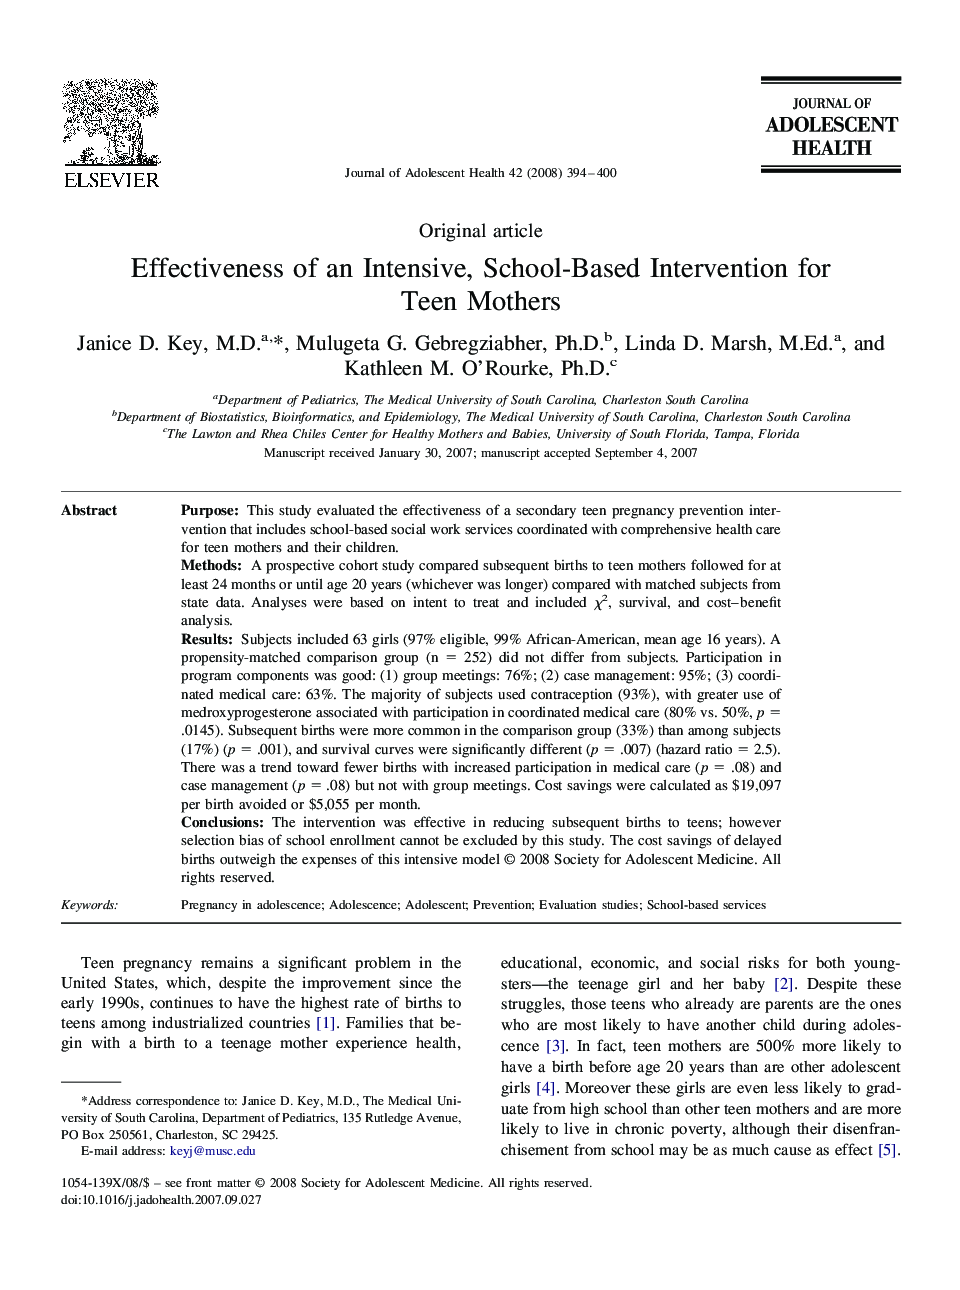 Effectiveness of an Intensive, School-Based Intervention for Teen Mothers